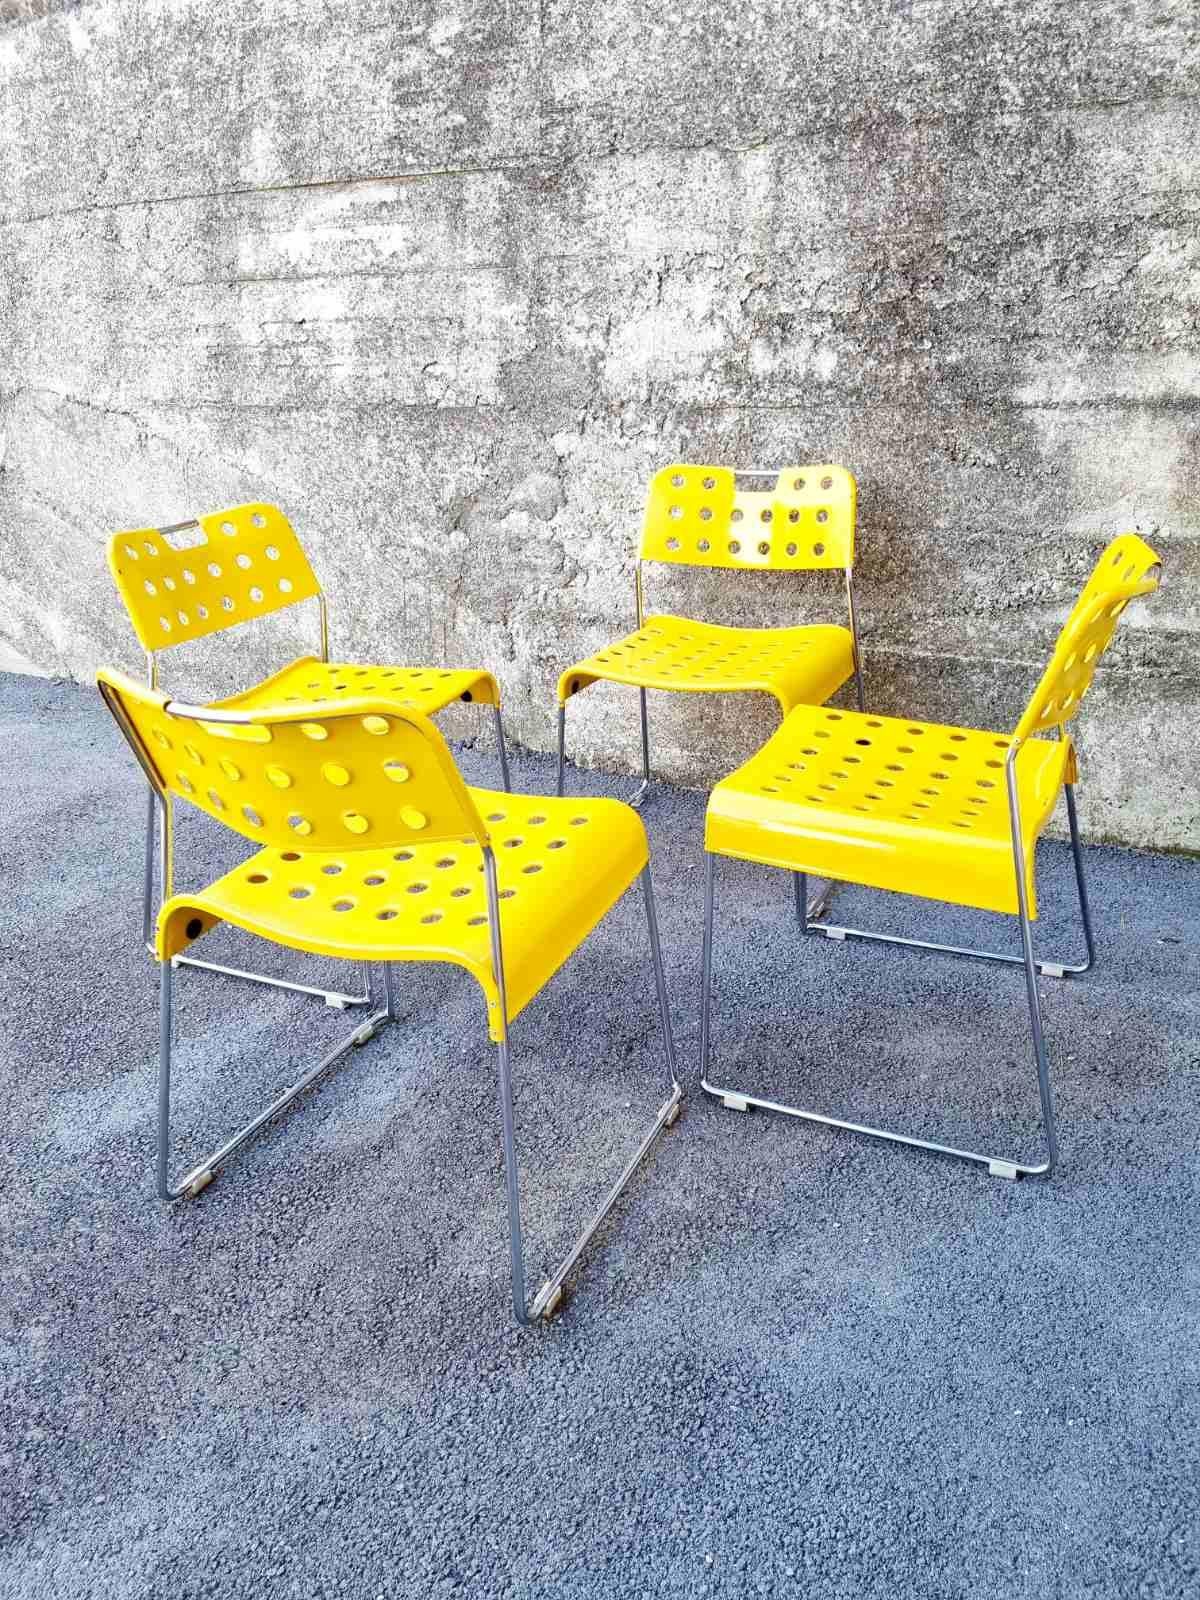 Set of 4 metal dining chairs model Omkstak designed by Rodney Kinsman and produced by Bieffeplast Padova in the 70s.
Tubular steel chromed frame, seat and back rest of moulded sheet steel coated with yellow epoxy resin. The perforated details make